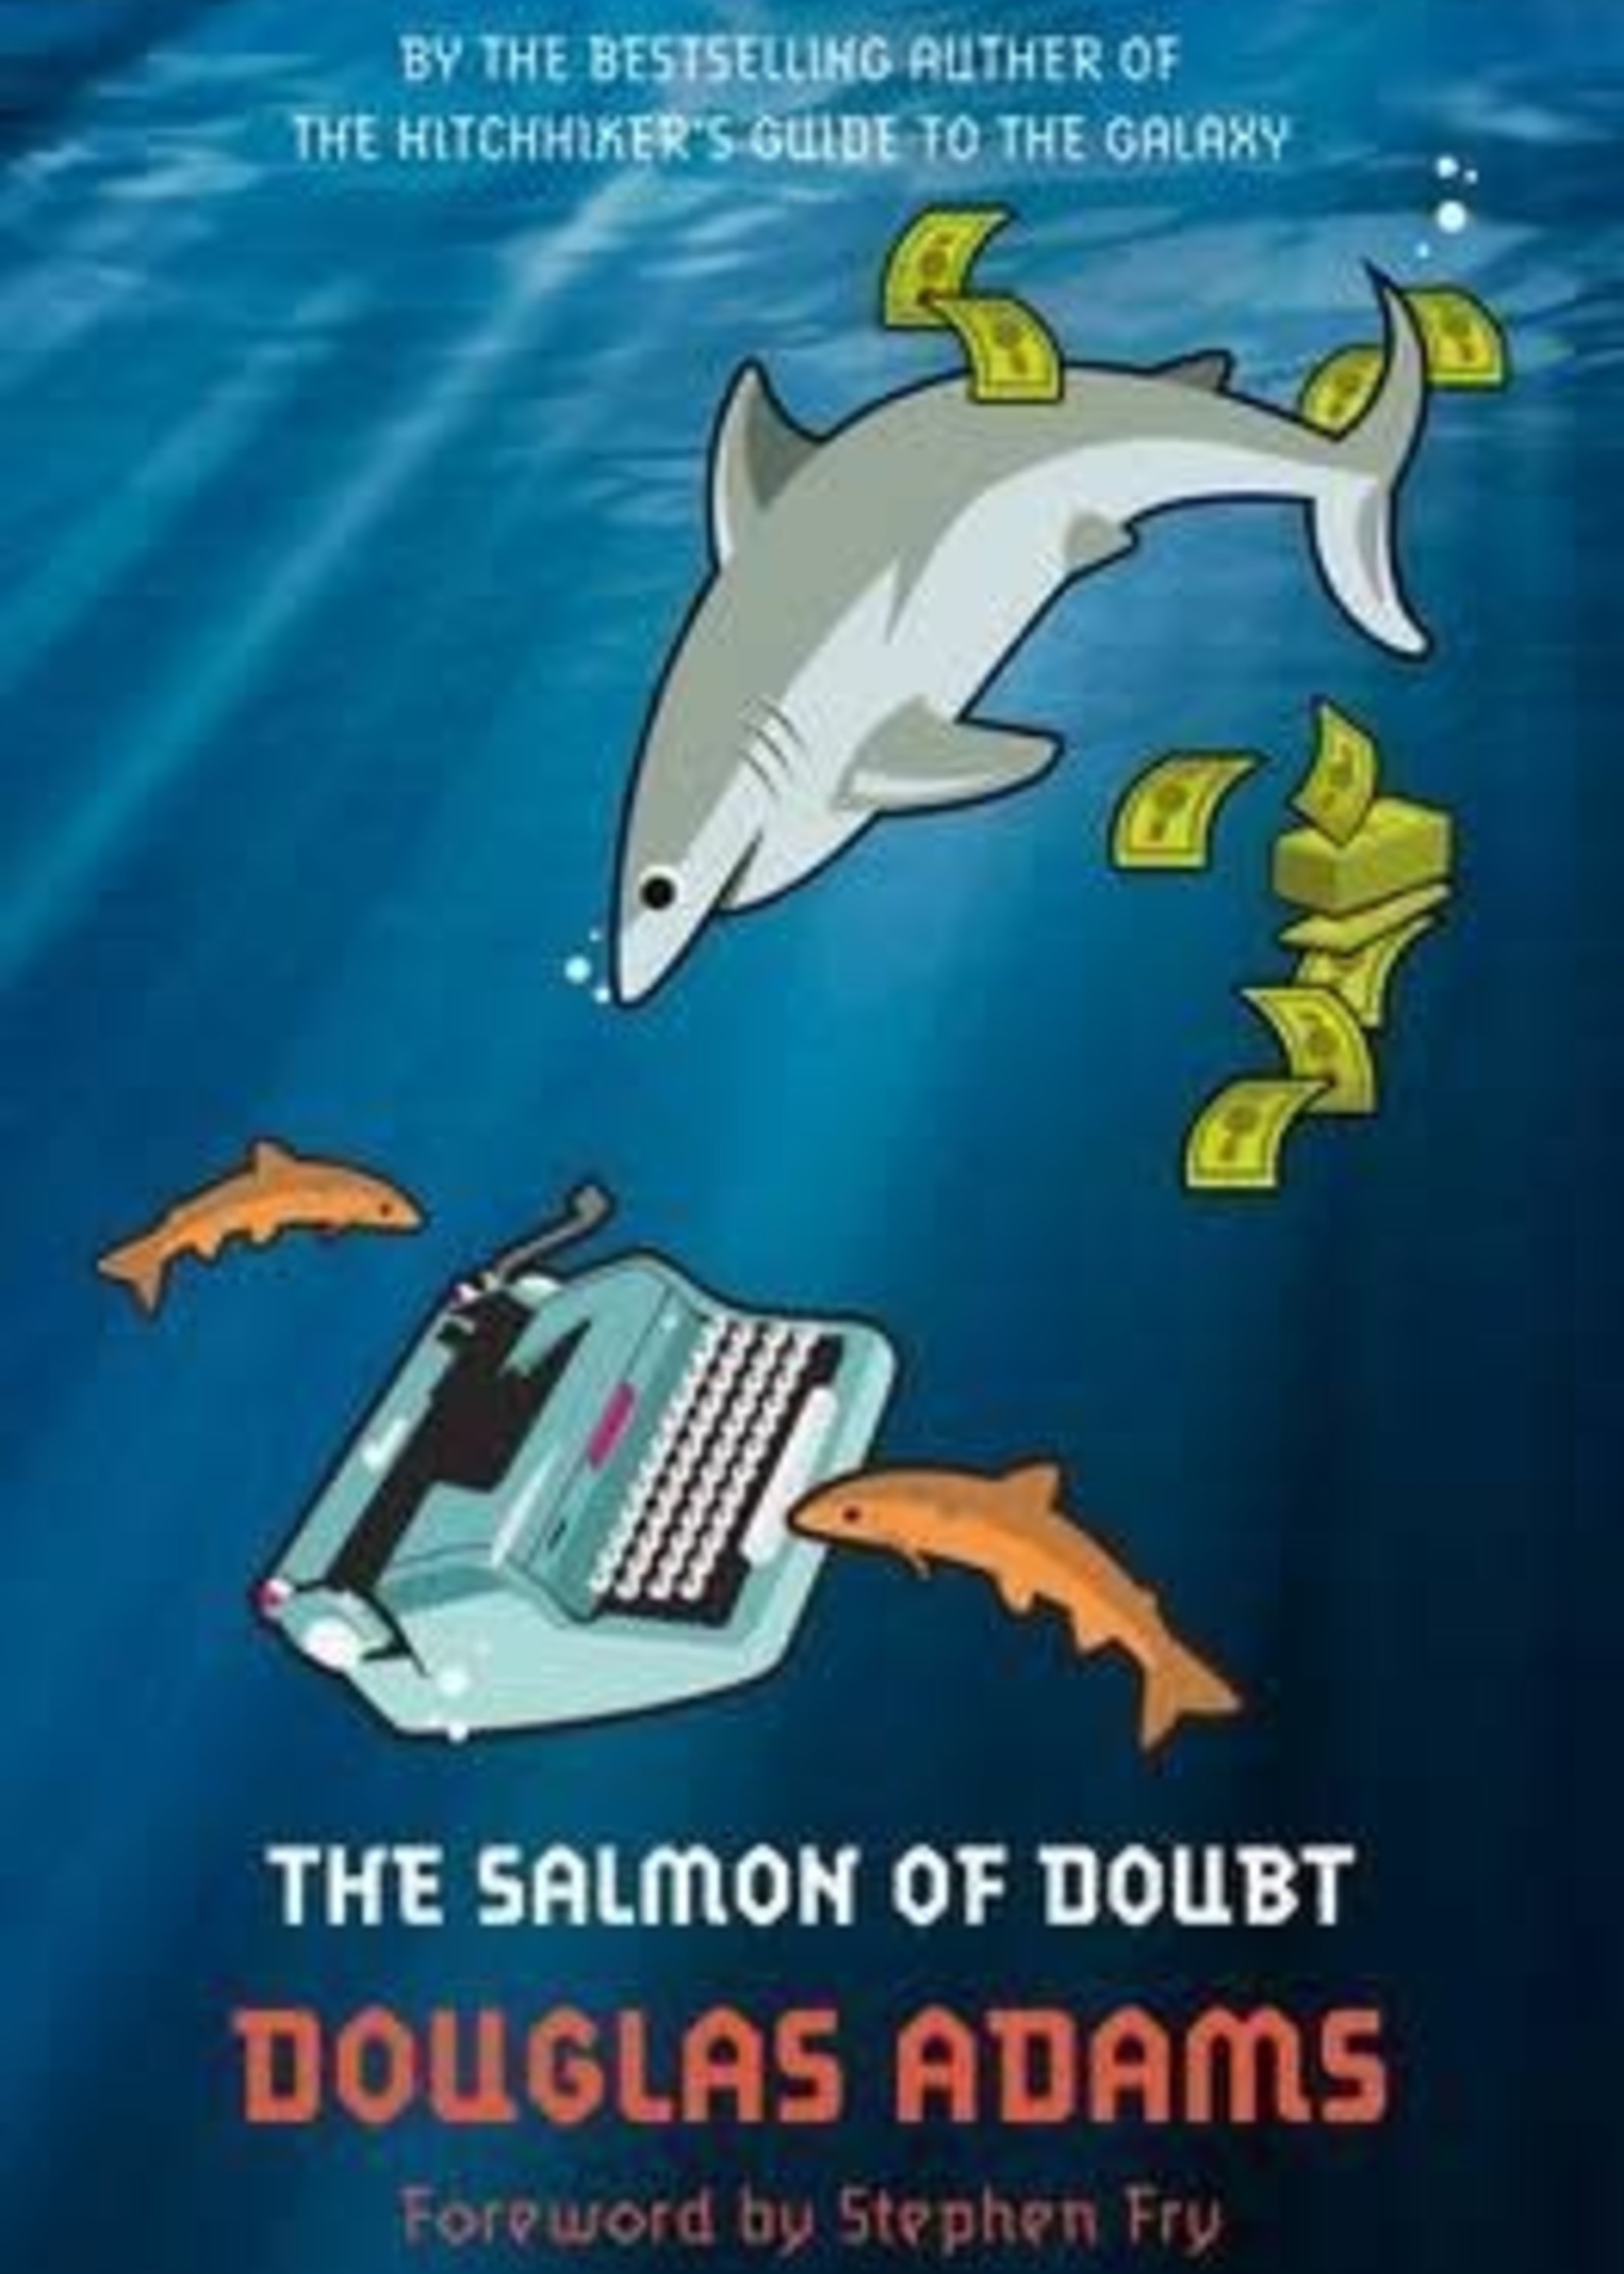 The Salmon of Doubt (Dirk Gently #3) by Douglas Adams